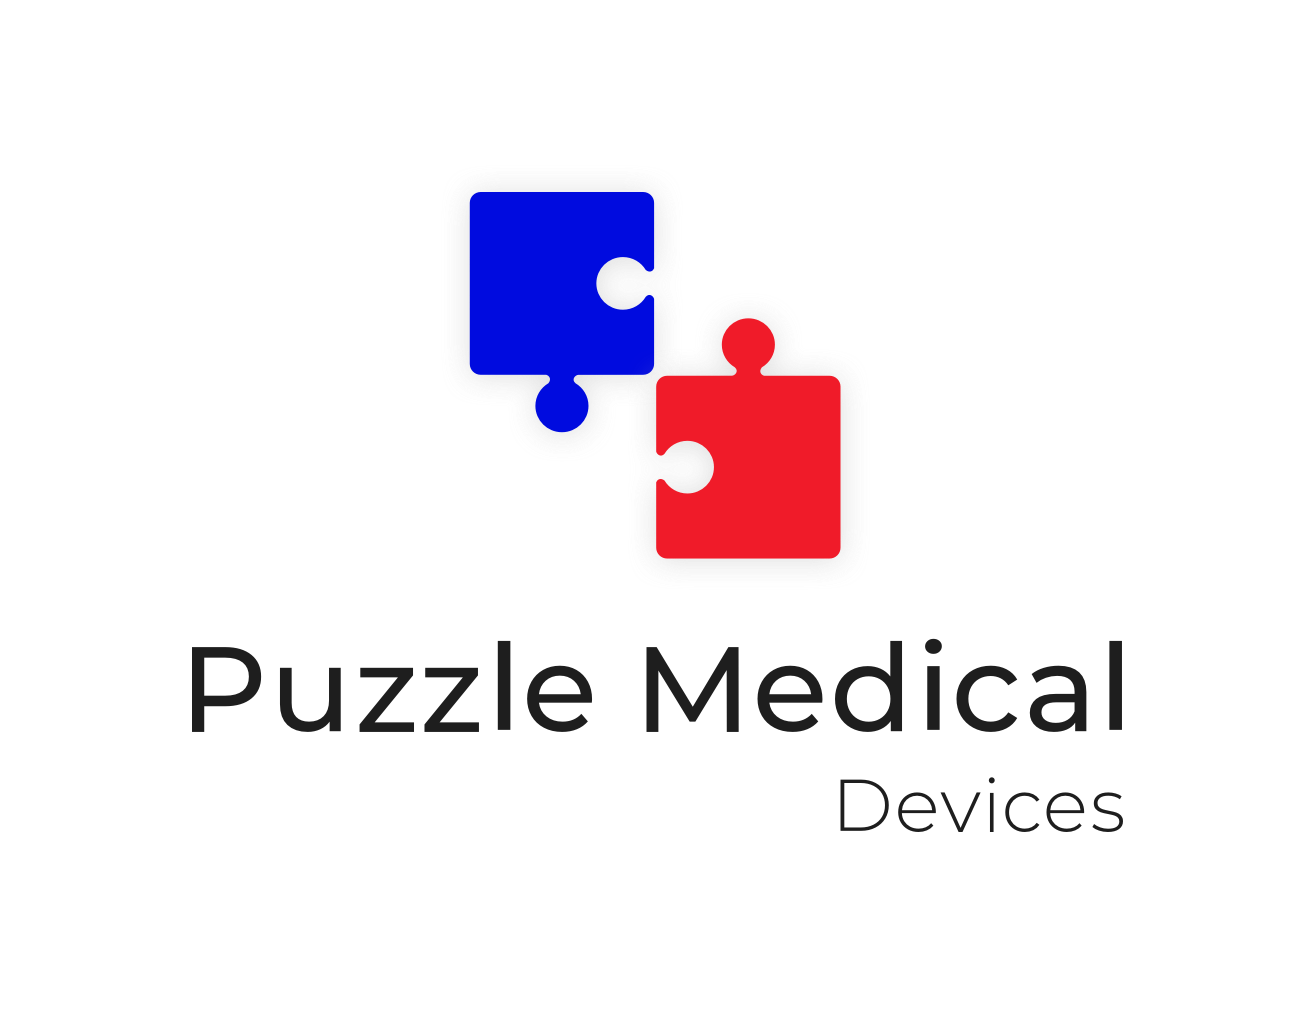 Puzzle Medical Devices, Inc.